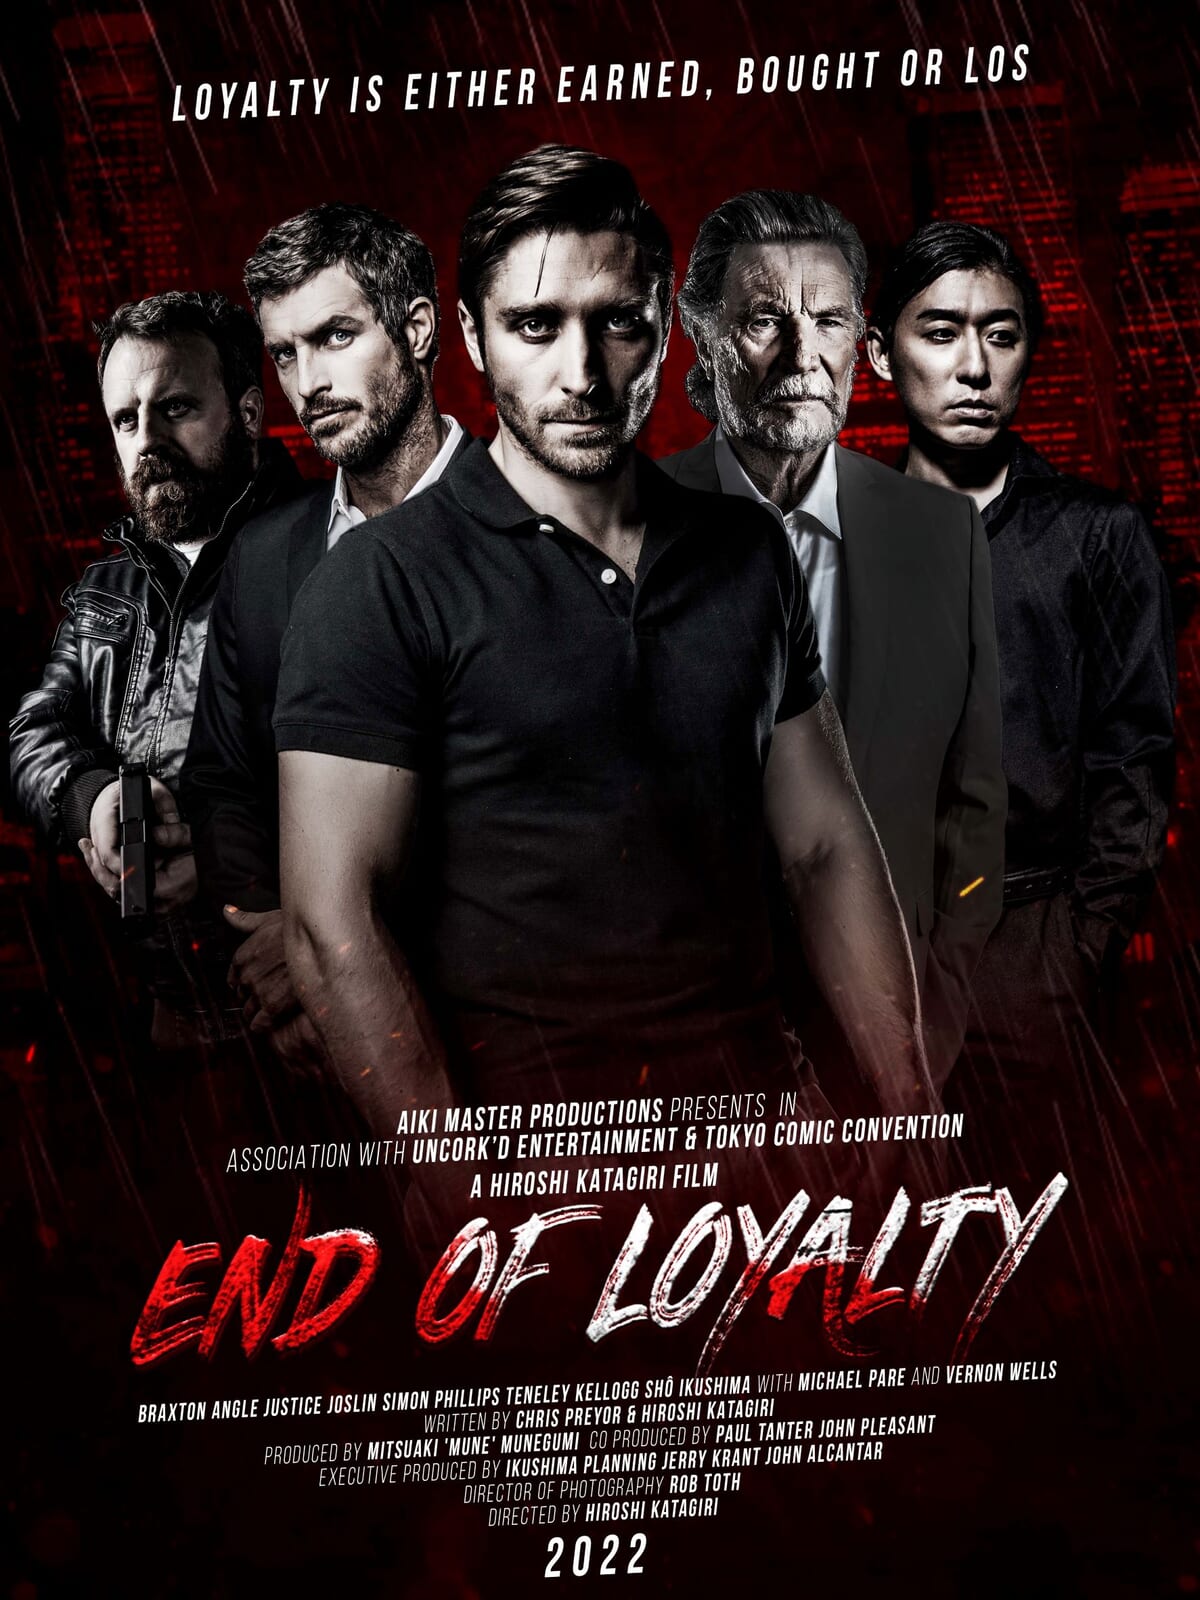 END-OF-LOYALTY ポスター